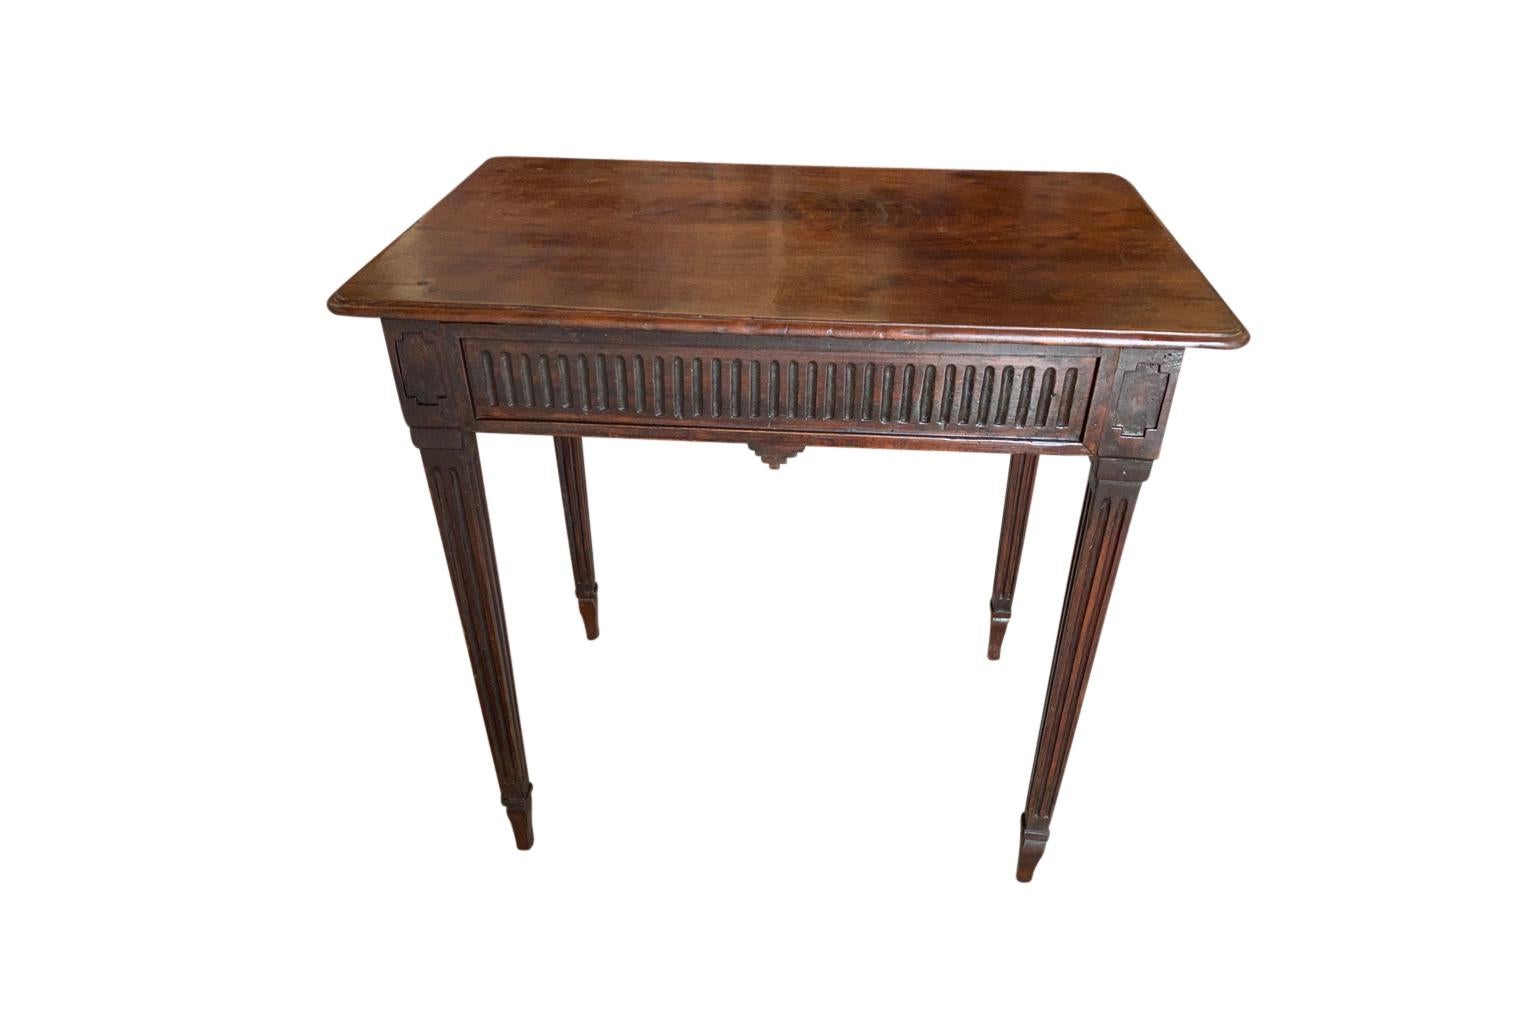 A very handsome later 19th century French Louis XVI style side table soundly constructed from beautiful walnut. Wonderful fluted and tapered legs with a single drawer. Perfect as an occasional table or bedside table.